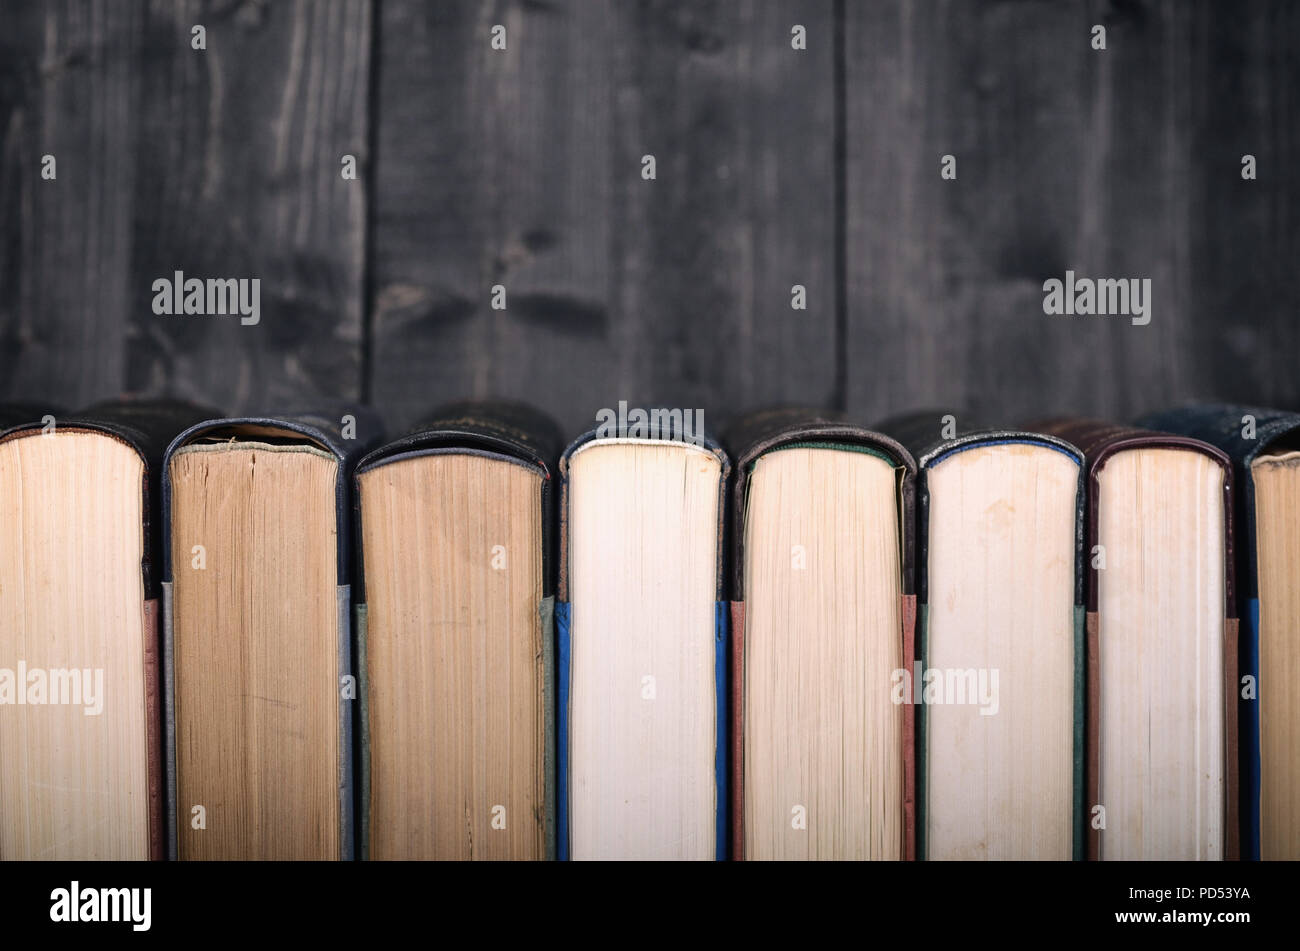 Old Law books on the black wooden background, black wooden backdrop. Stock Photo